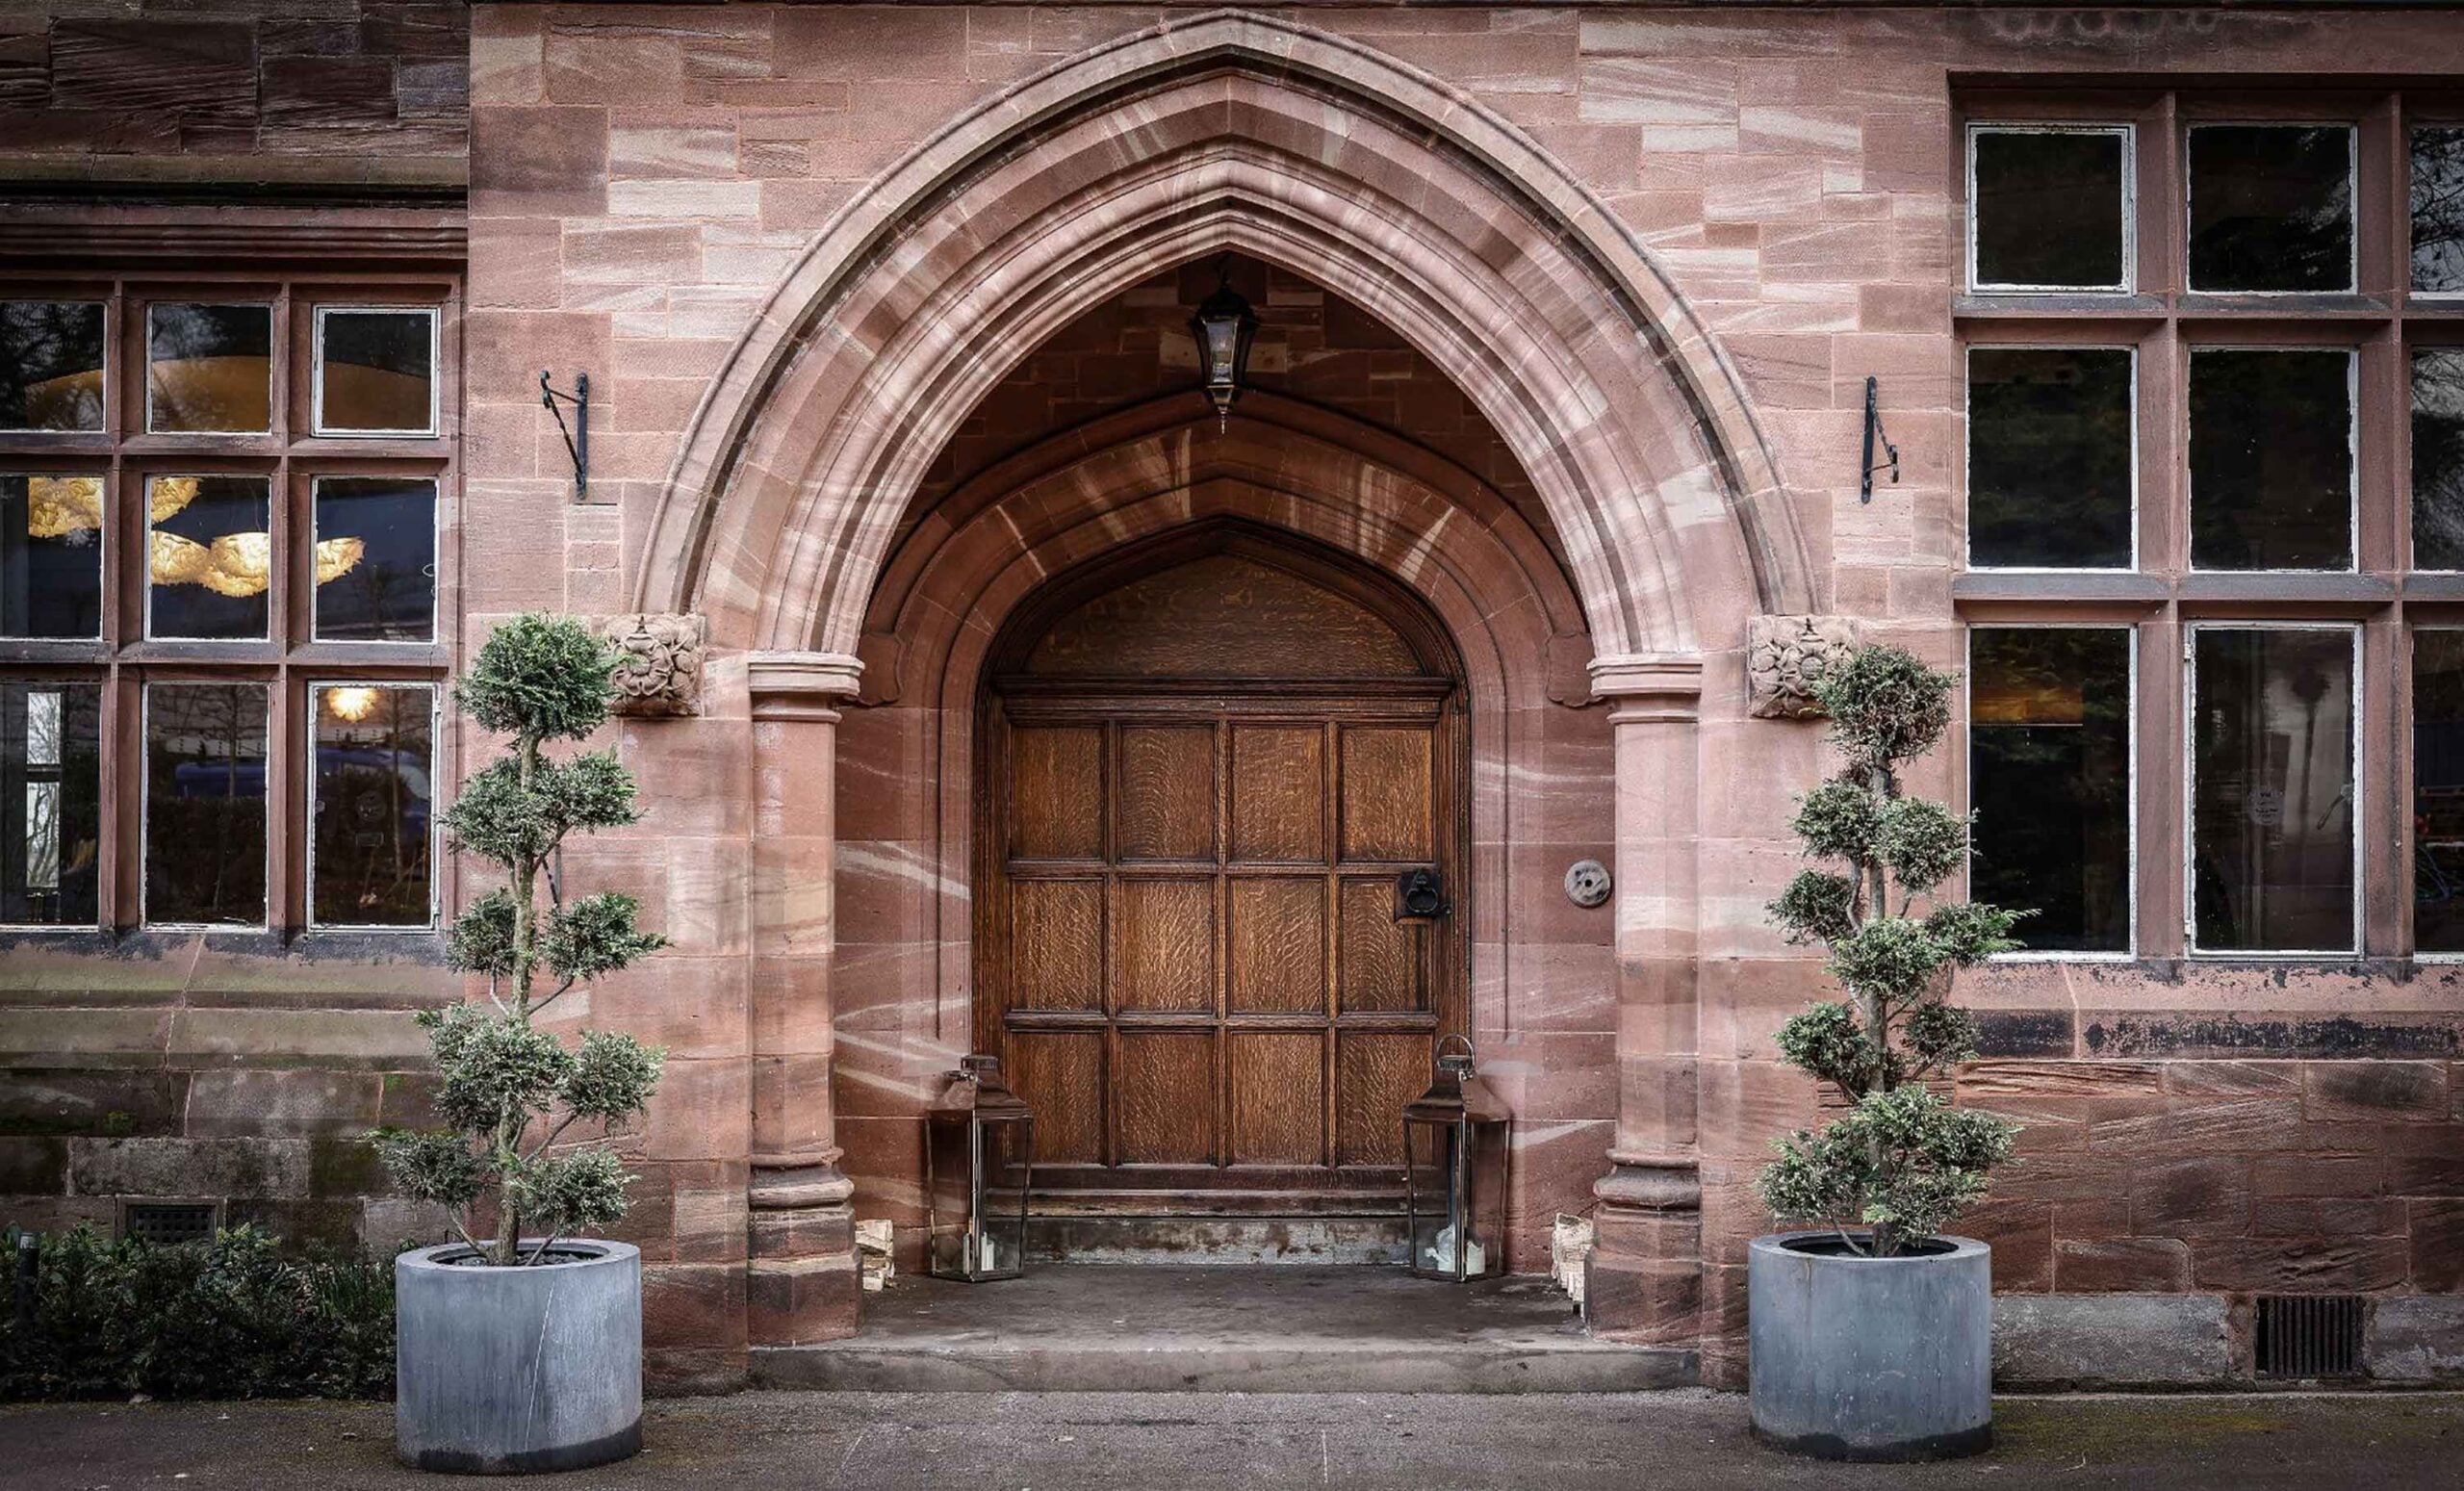 standon hall main entrance door with heritage original hardwood timber and solid red stone walls